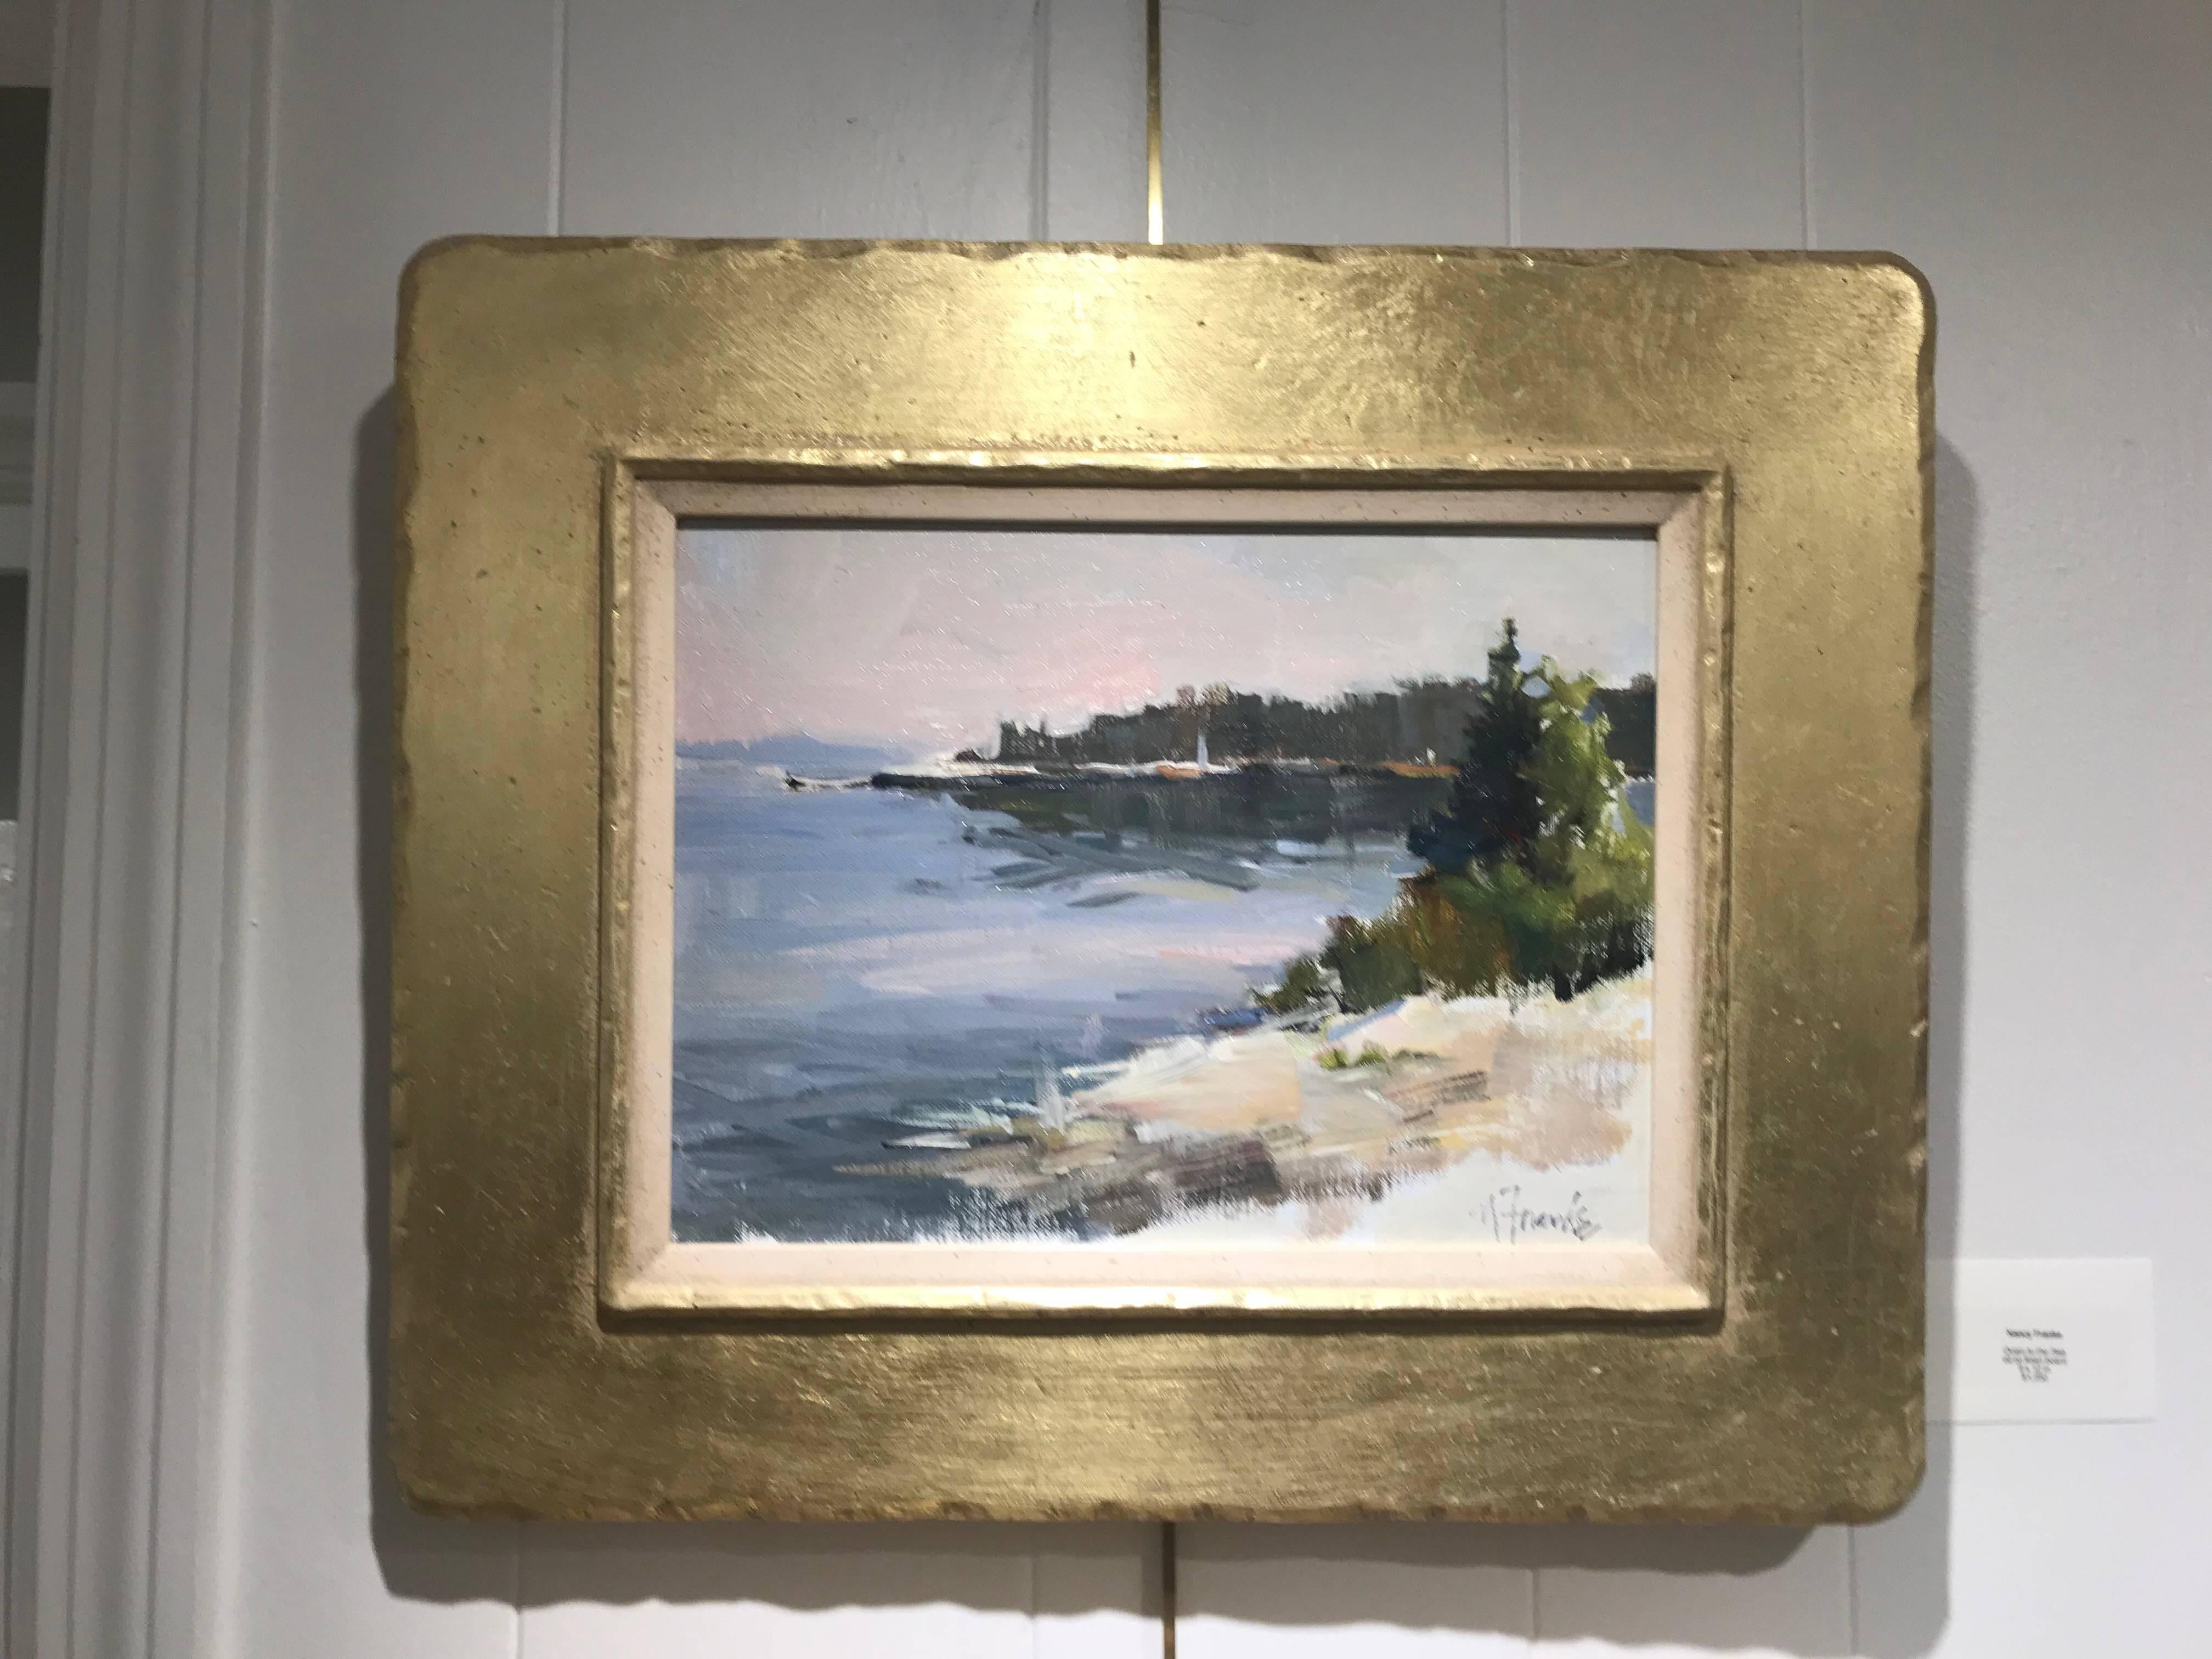 American artist Nancy Franke created this framed oil on linen board painting entitled 'Sparkling Morning in Maine' in 2017. Featuring a seaside scene, the artist chose a muted palette made of light browns, beiges, greens and blues to depict a coast